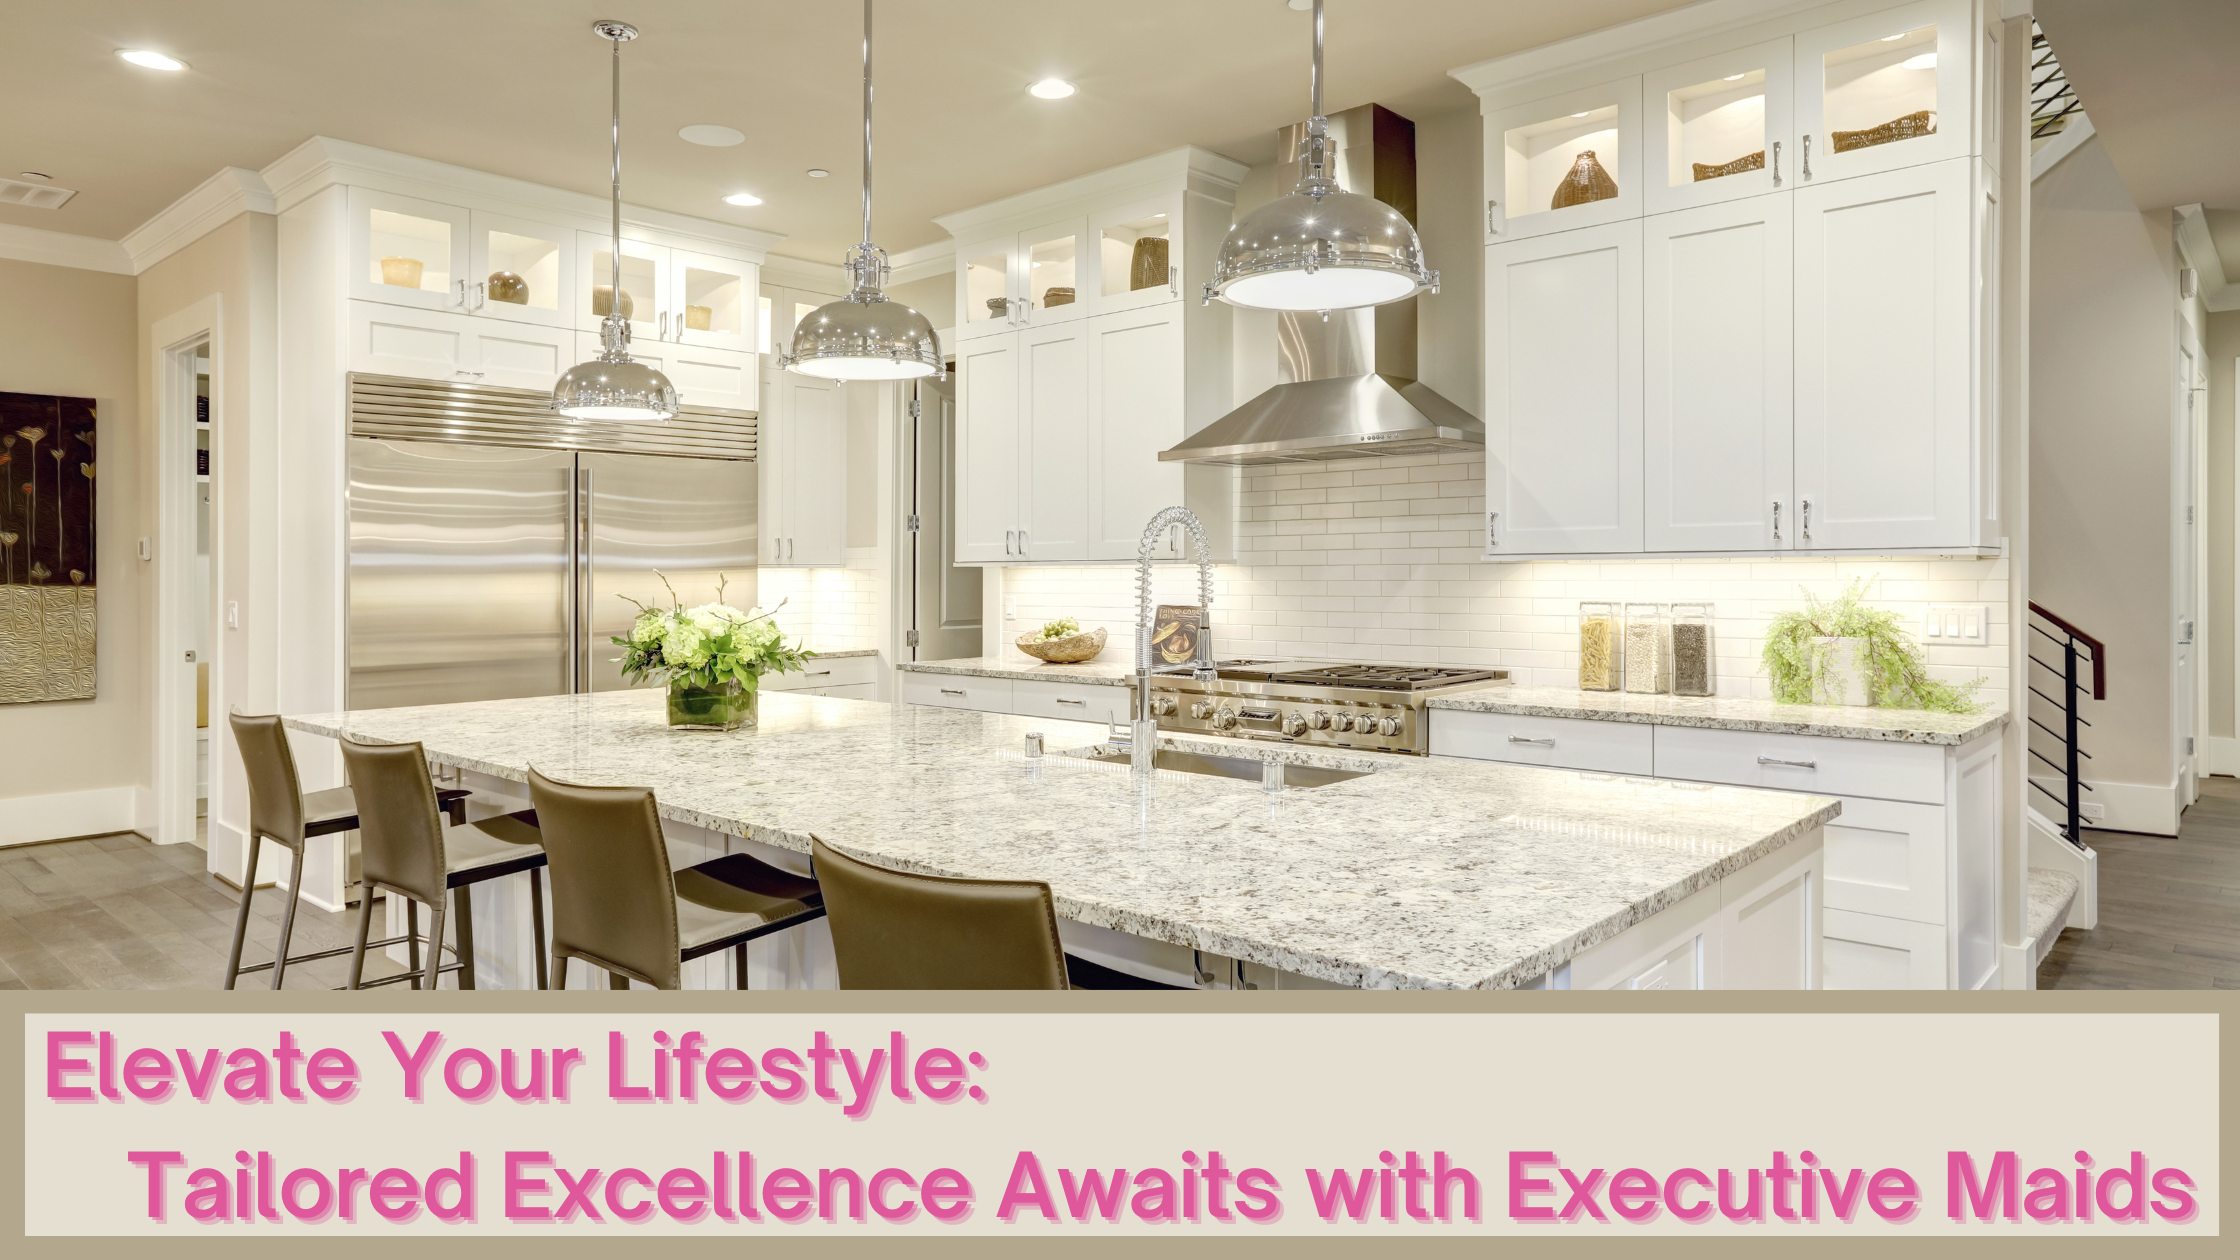 Personalized Luxury Cleaning Services for Discerning Individuals